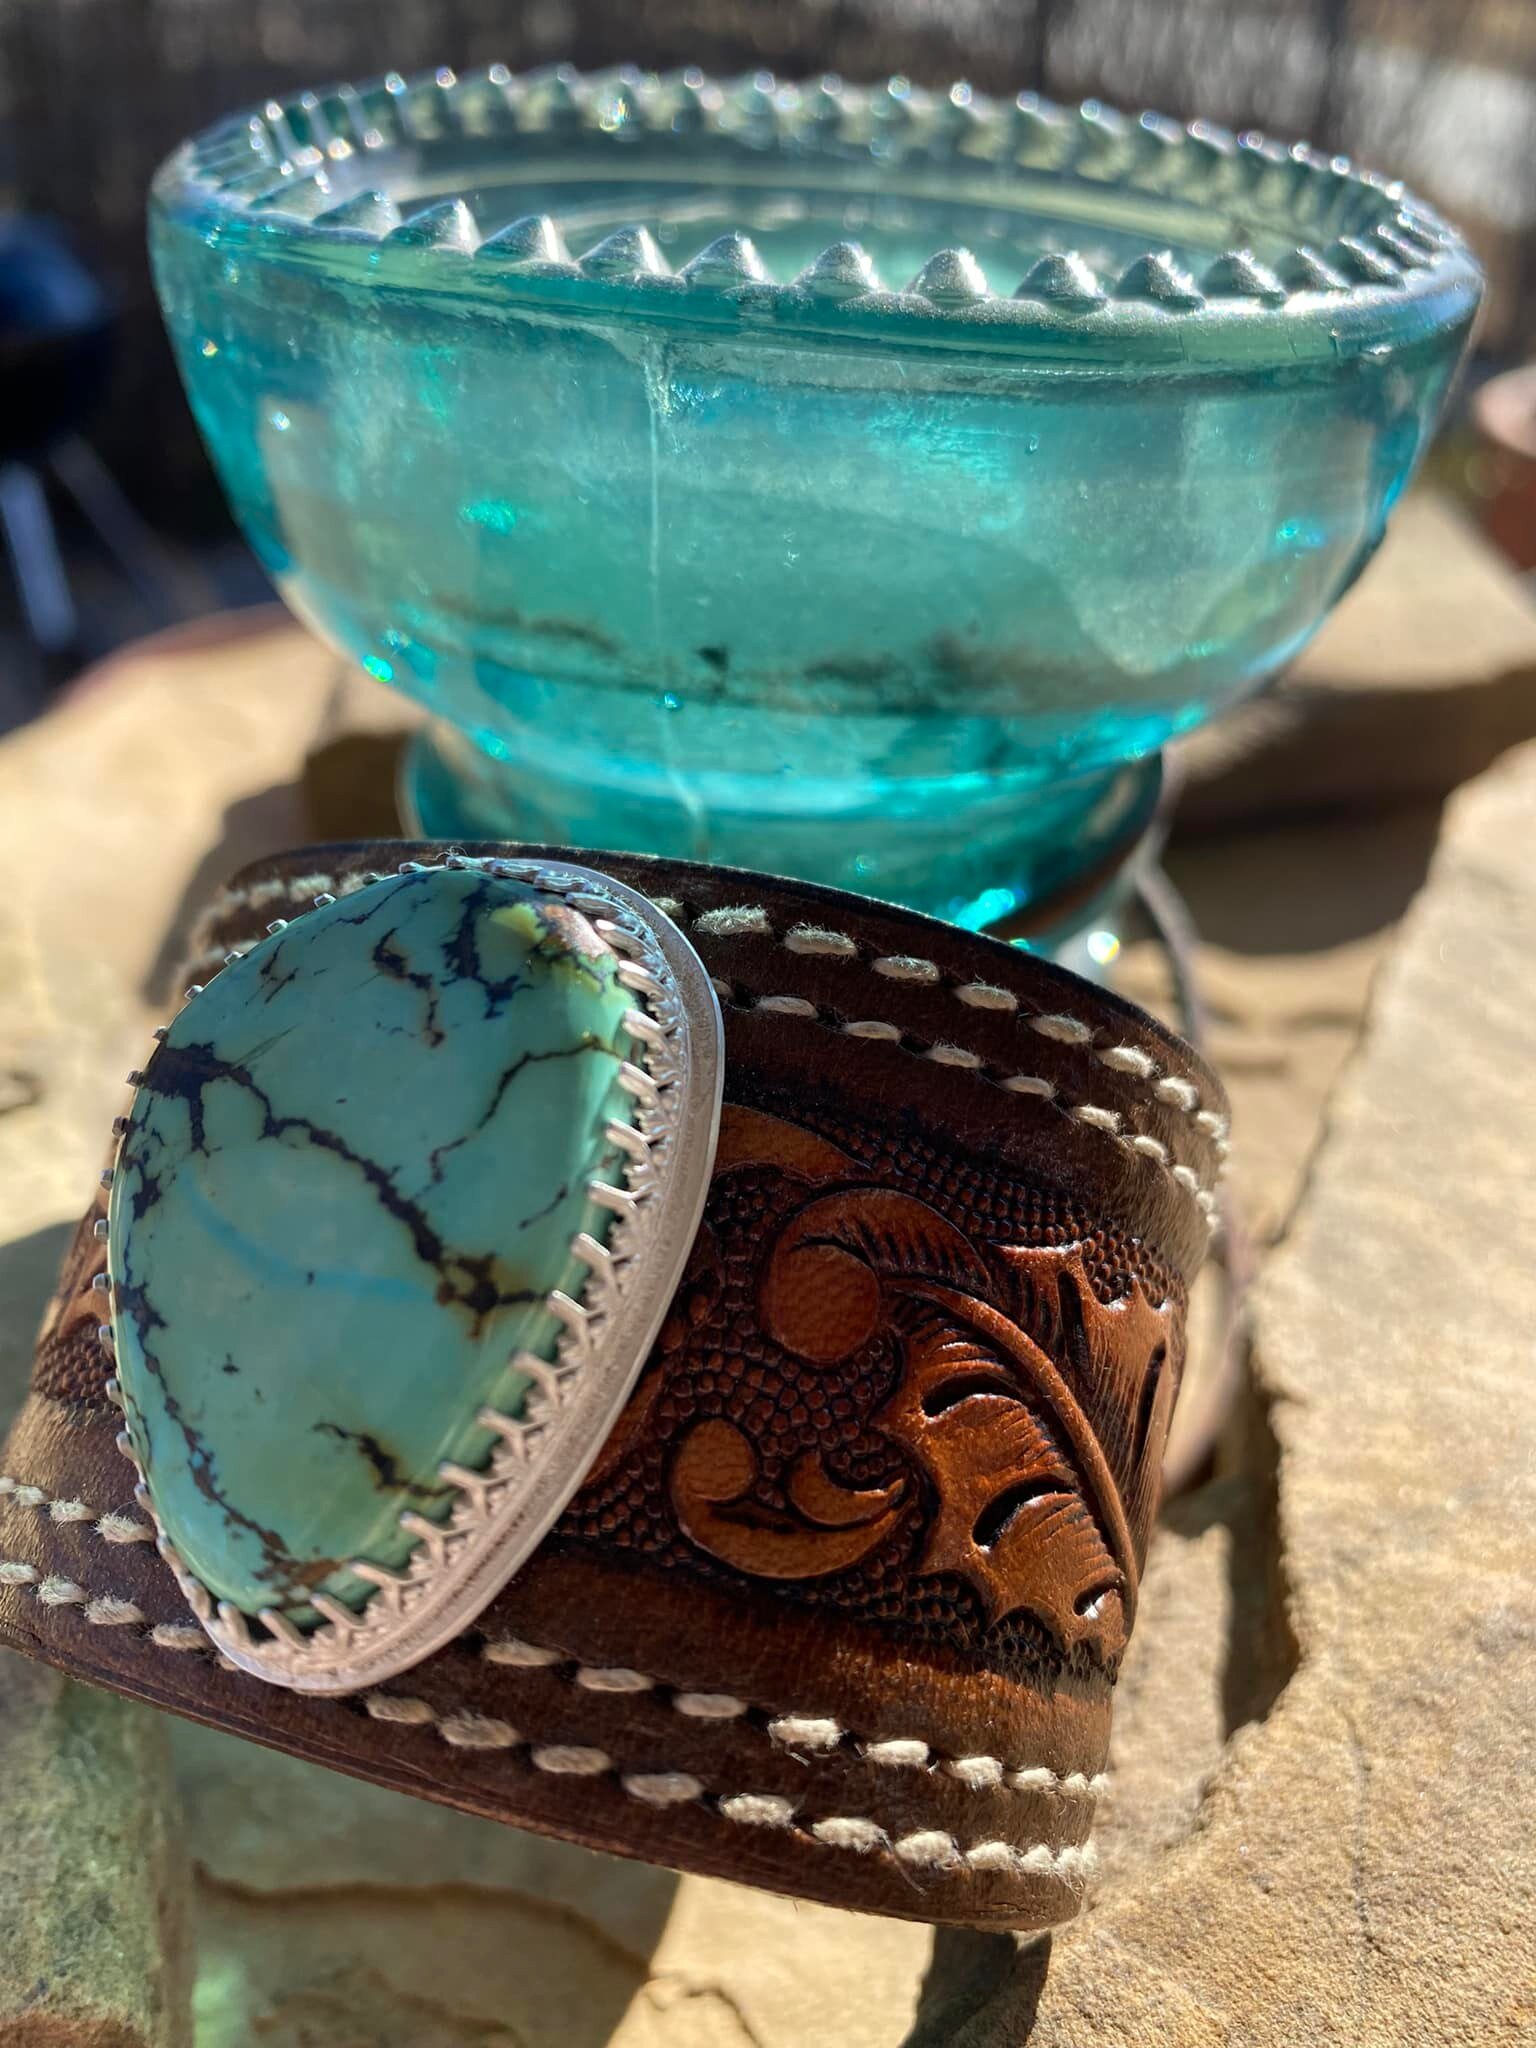 Getting ready for next weekend Handmade Omaha Winter Art &amp; Craft Bazaar.

Fresh off my bench from Saturday is a beautiful turquoise and leather cuff. That turquoise is soooo pretty. The dark brown veining resembles tree branches.. the stone is se